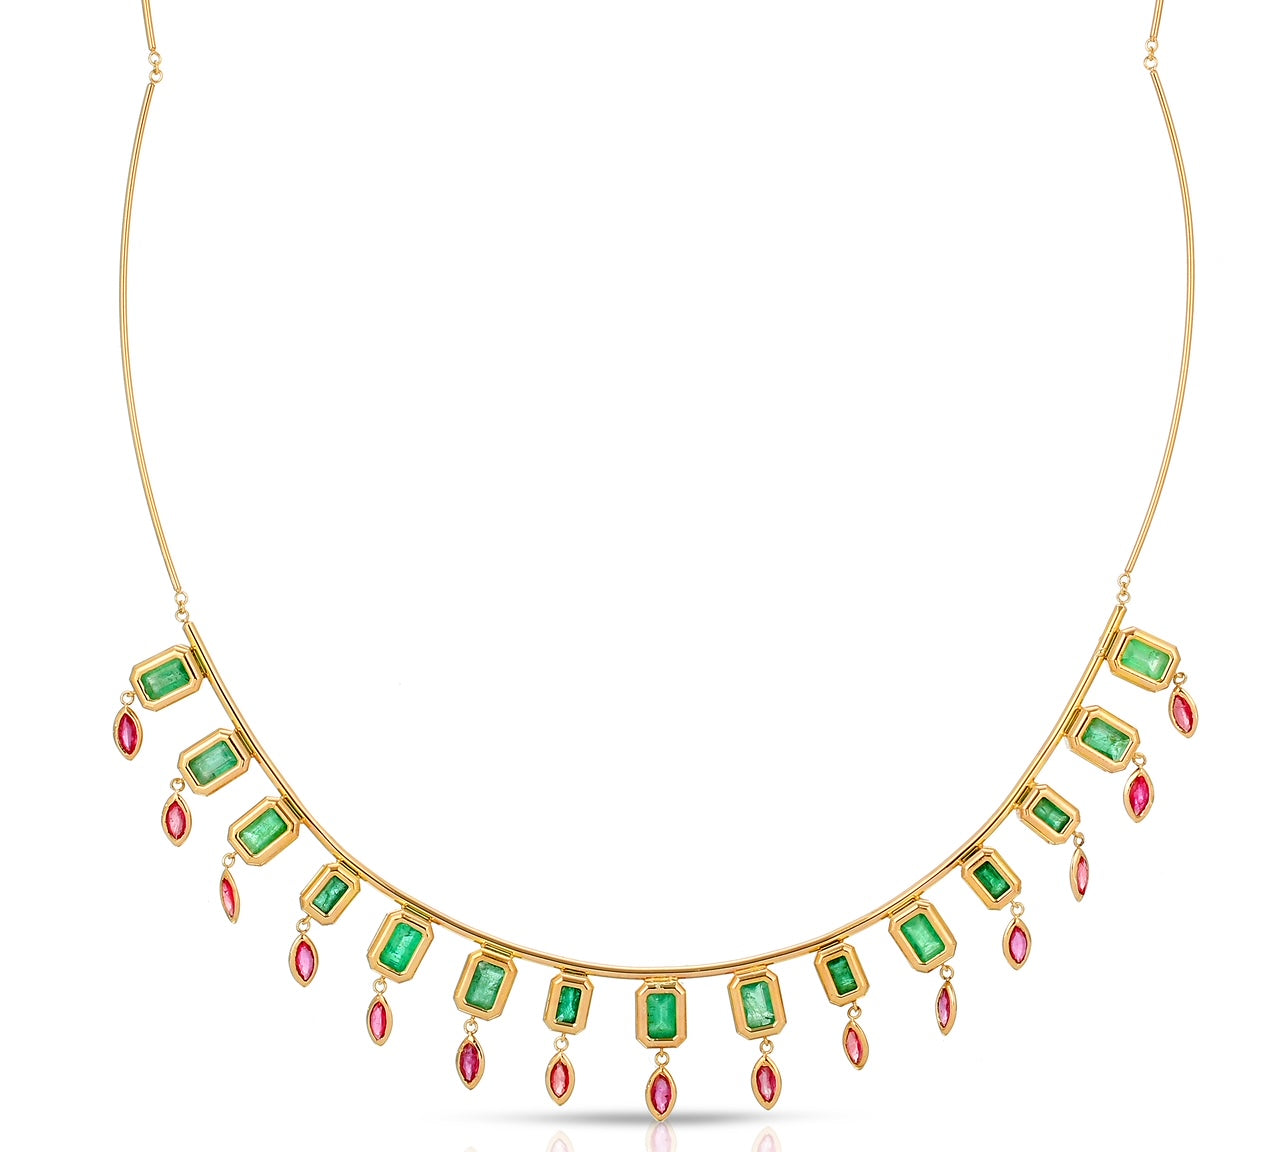 Crown Necklace in Emerald and Ruby Collar Christina Magdolna Jewelry   